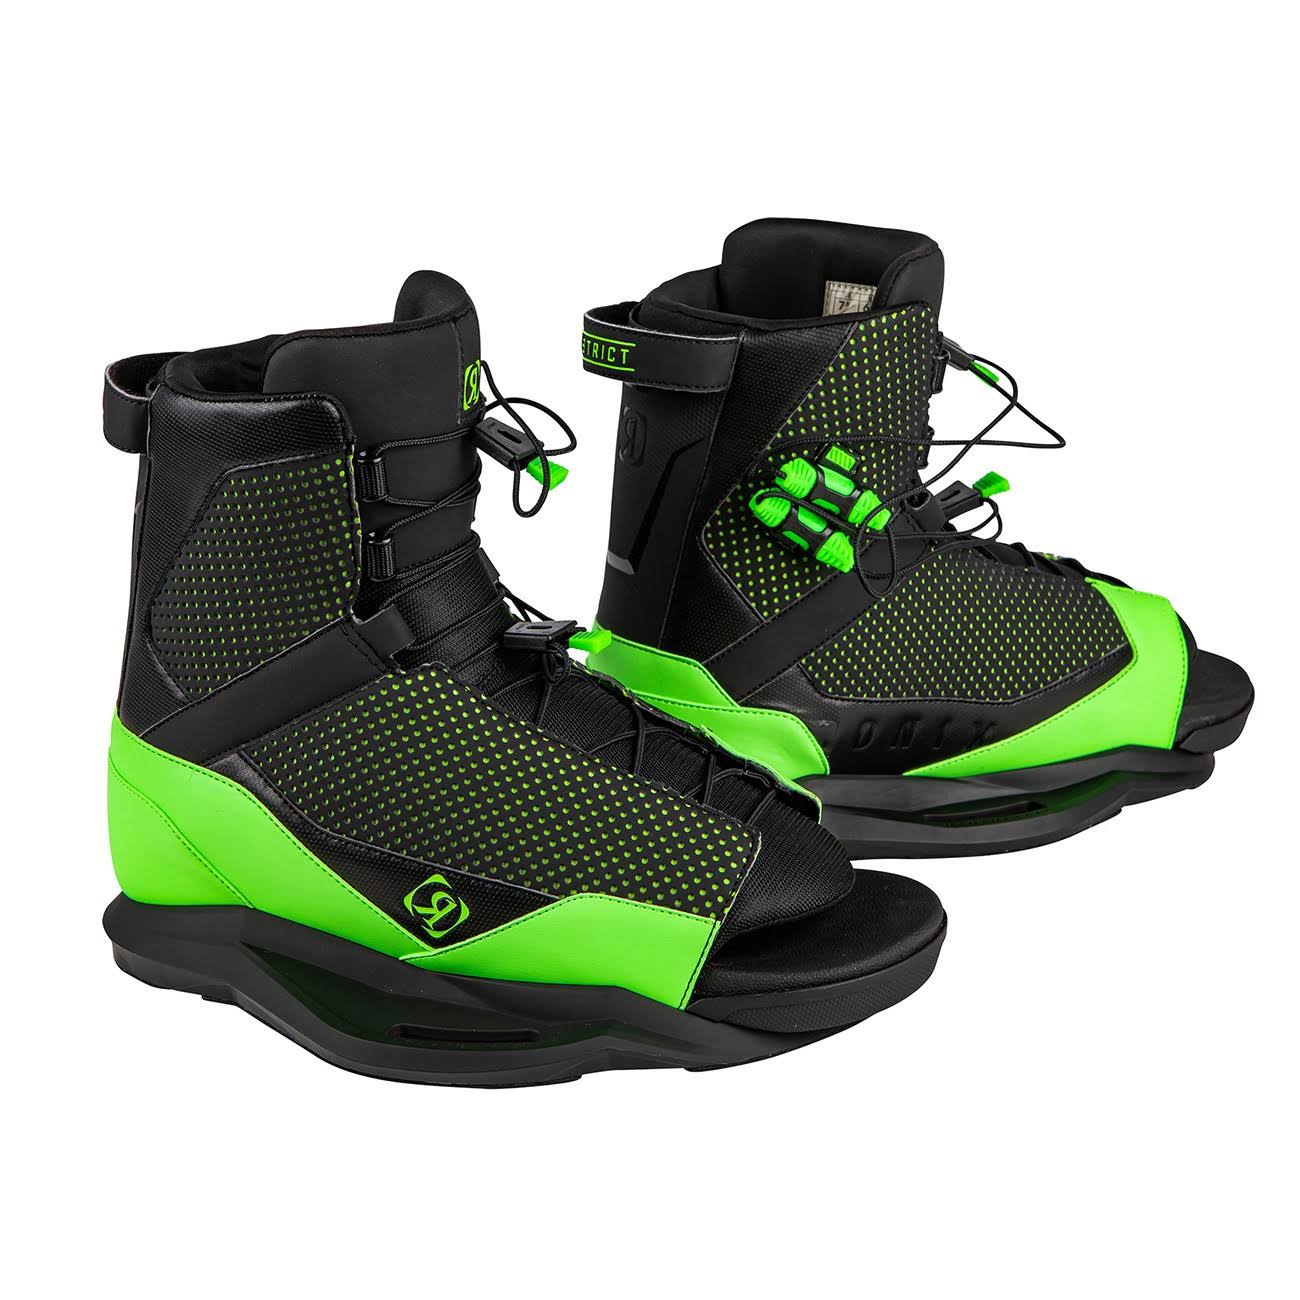 Ronix District Wakeboard Boots 2021 - 10.5-14.5